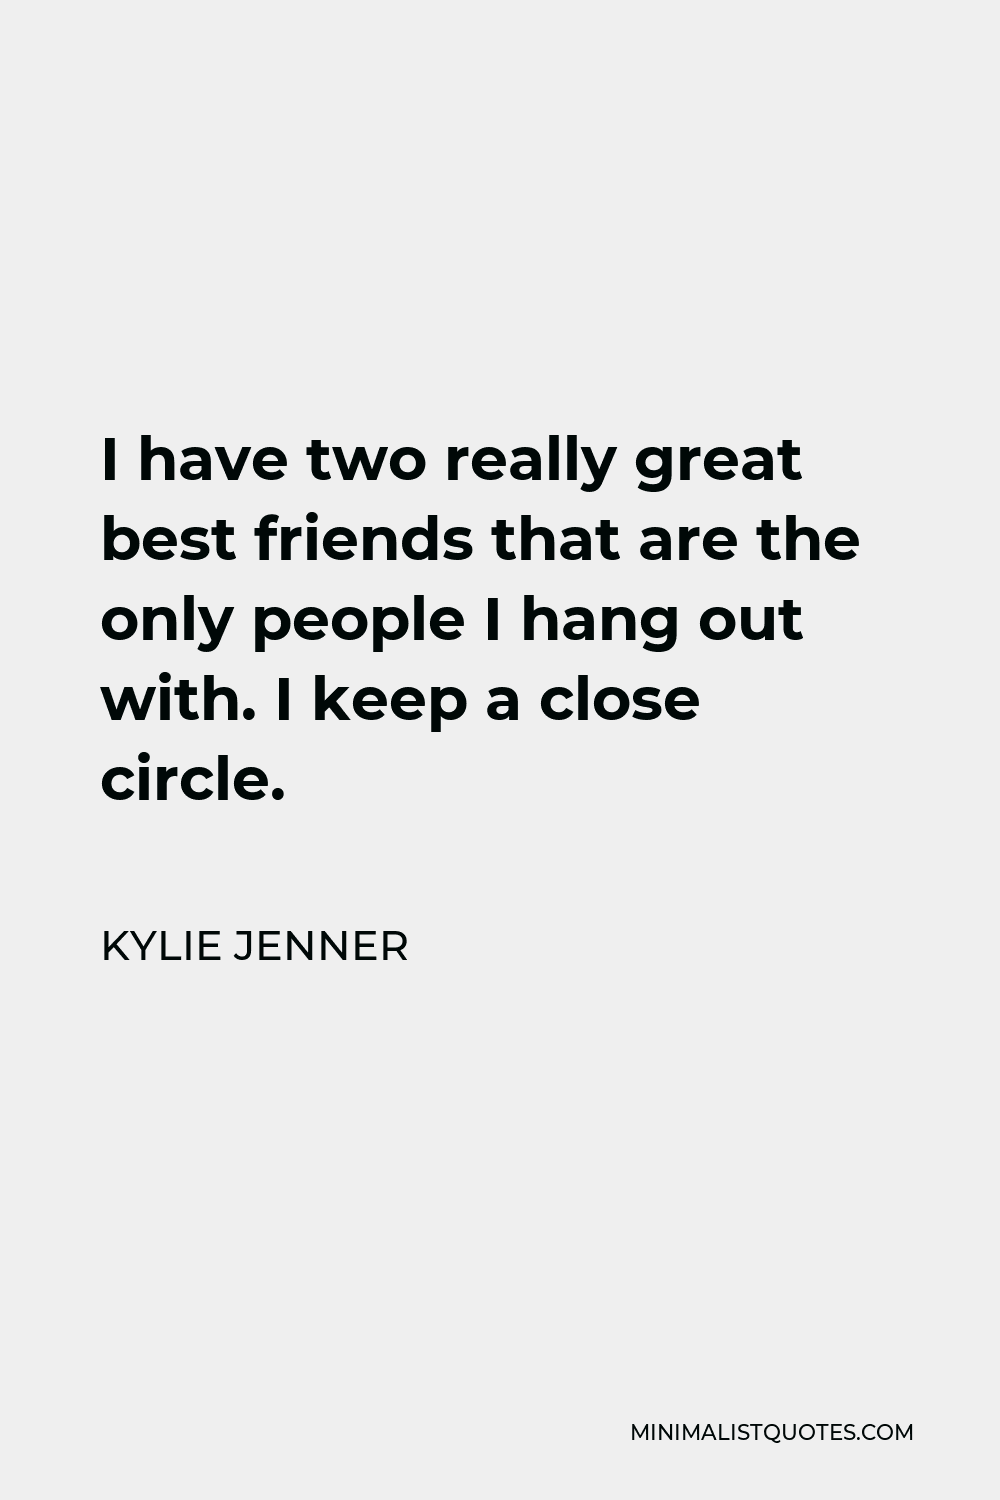 Kylie Jenner Quote - I have two really great best friends that are the only people I hang out with. I keep a close circle.